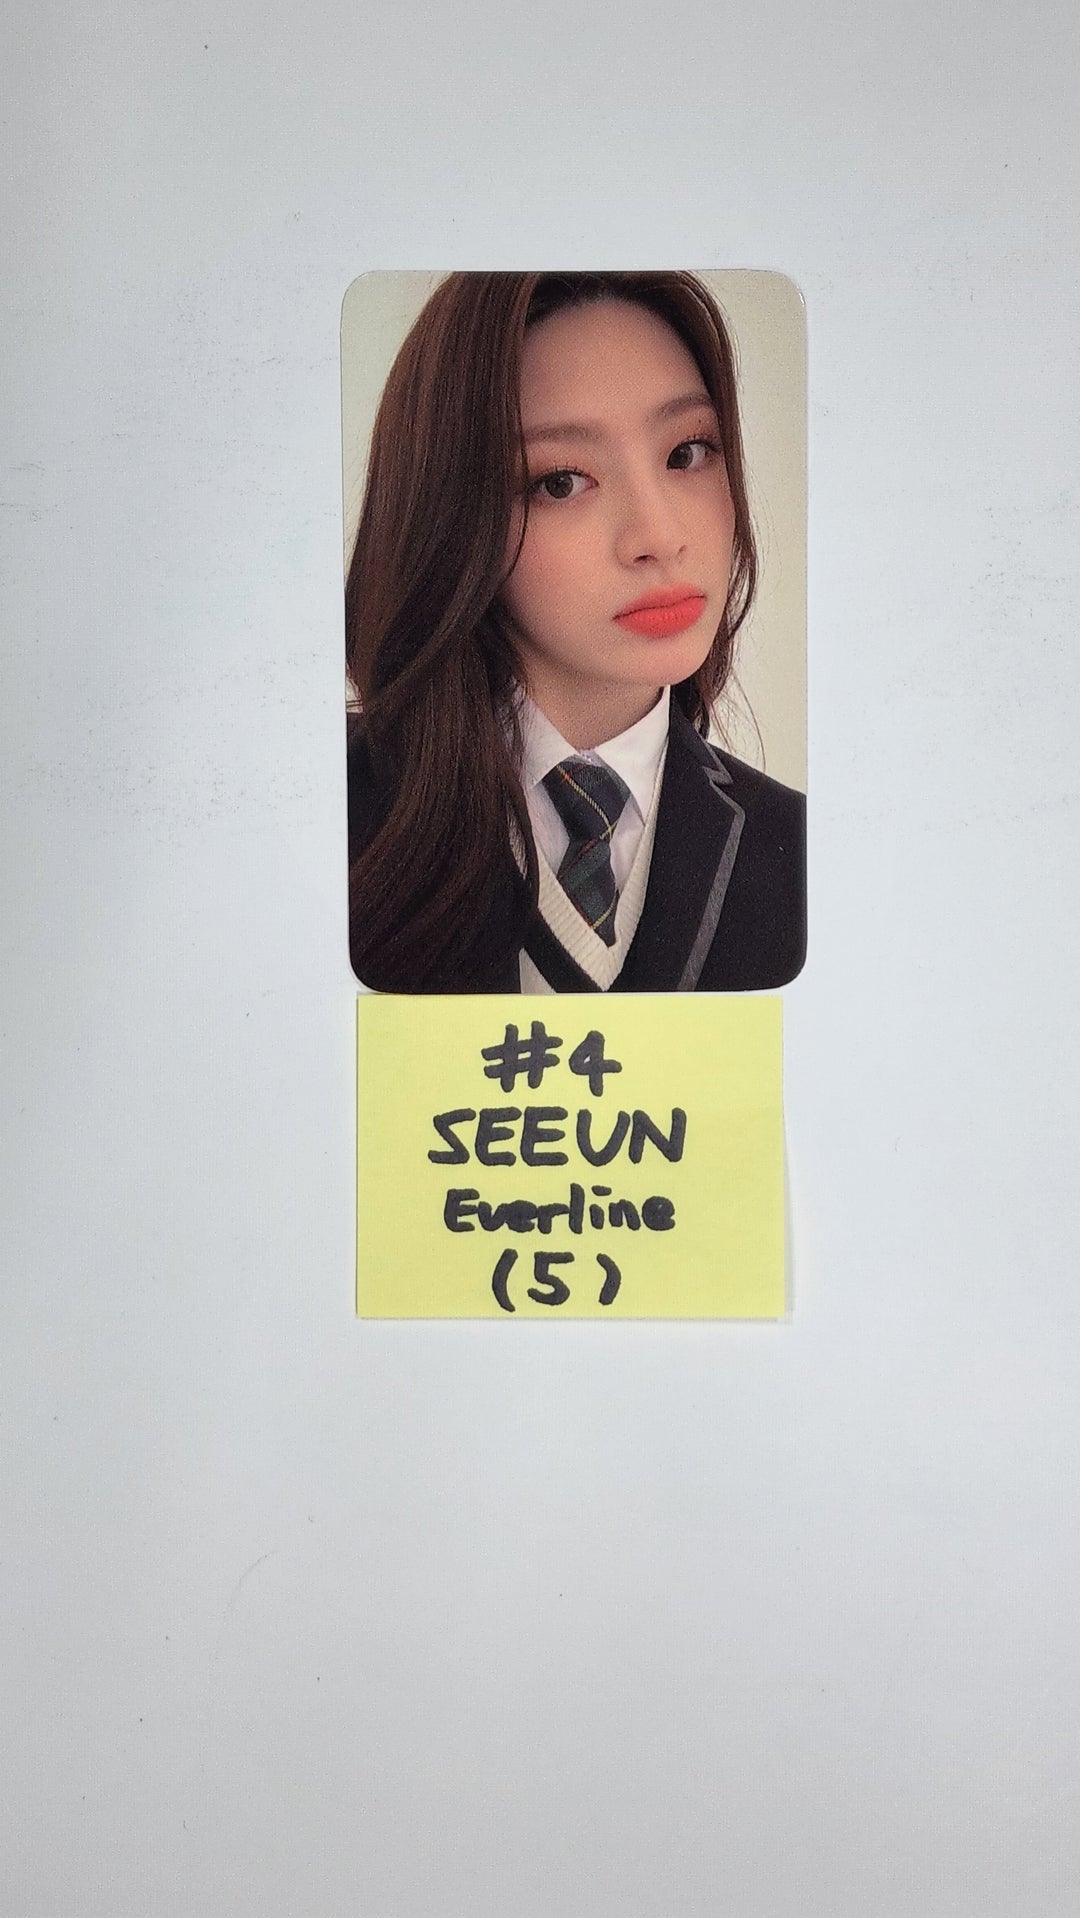 StayC 'WE NEED LOVE' - Everline Fansign Event Photocard